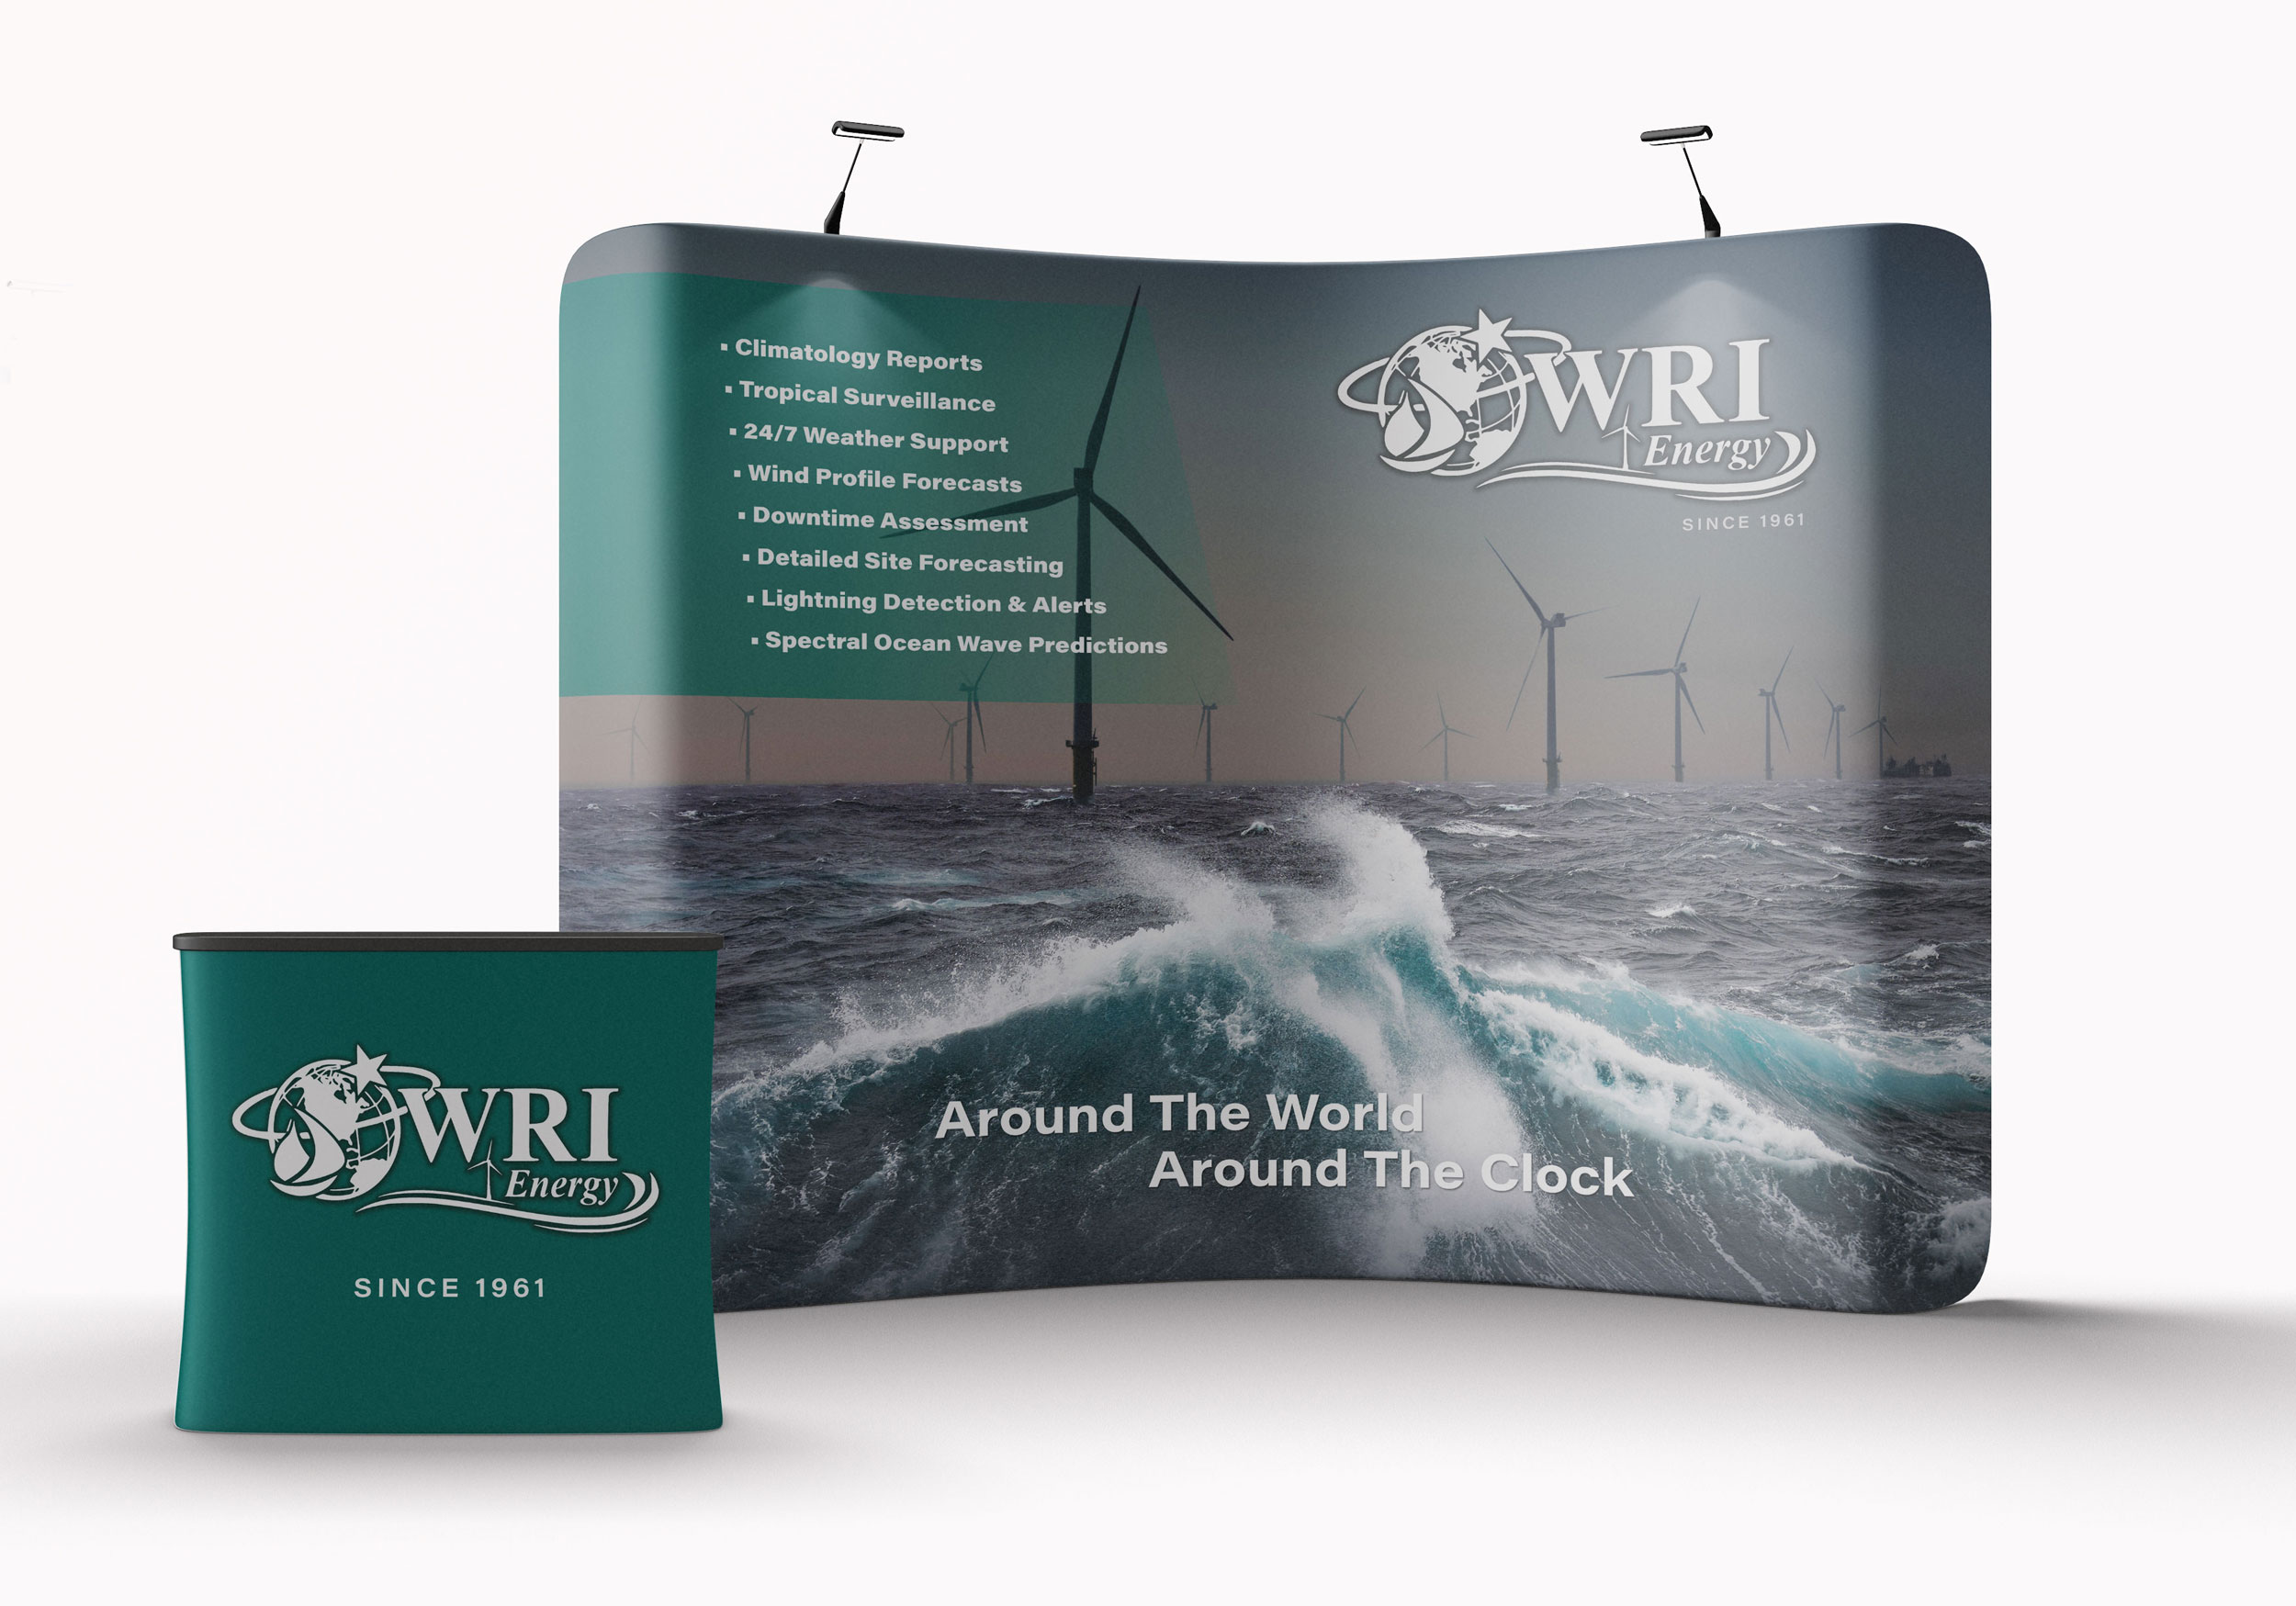 trade show booth graphic design, offshore energy weather consultant